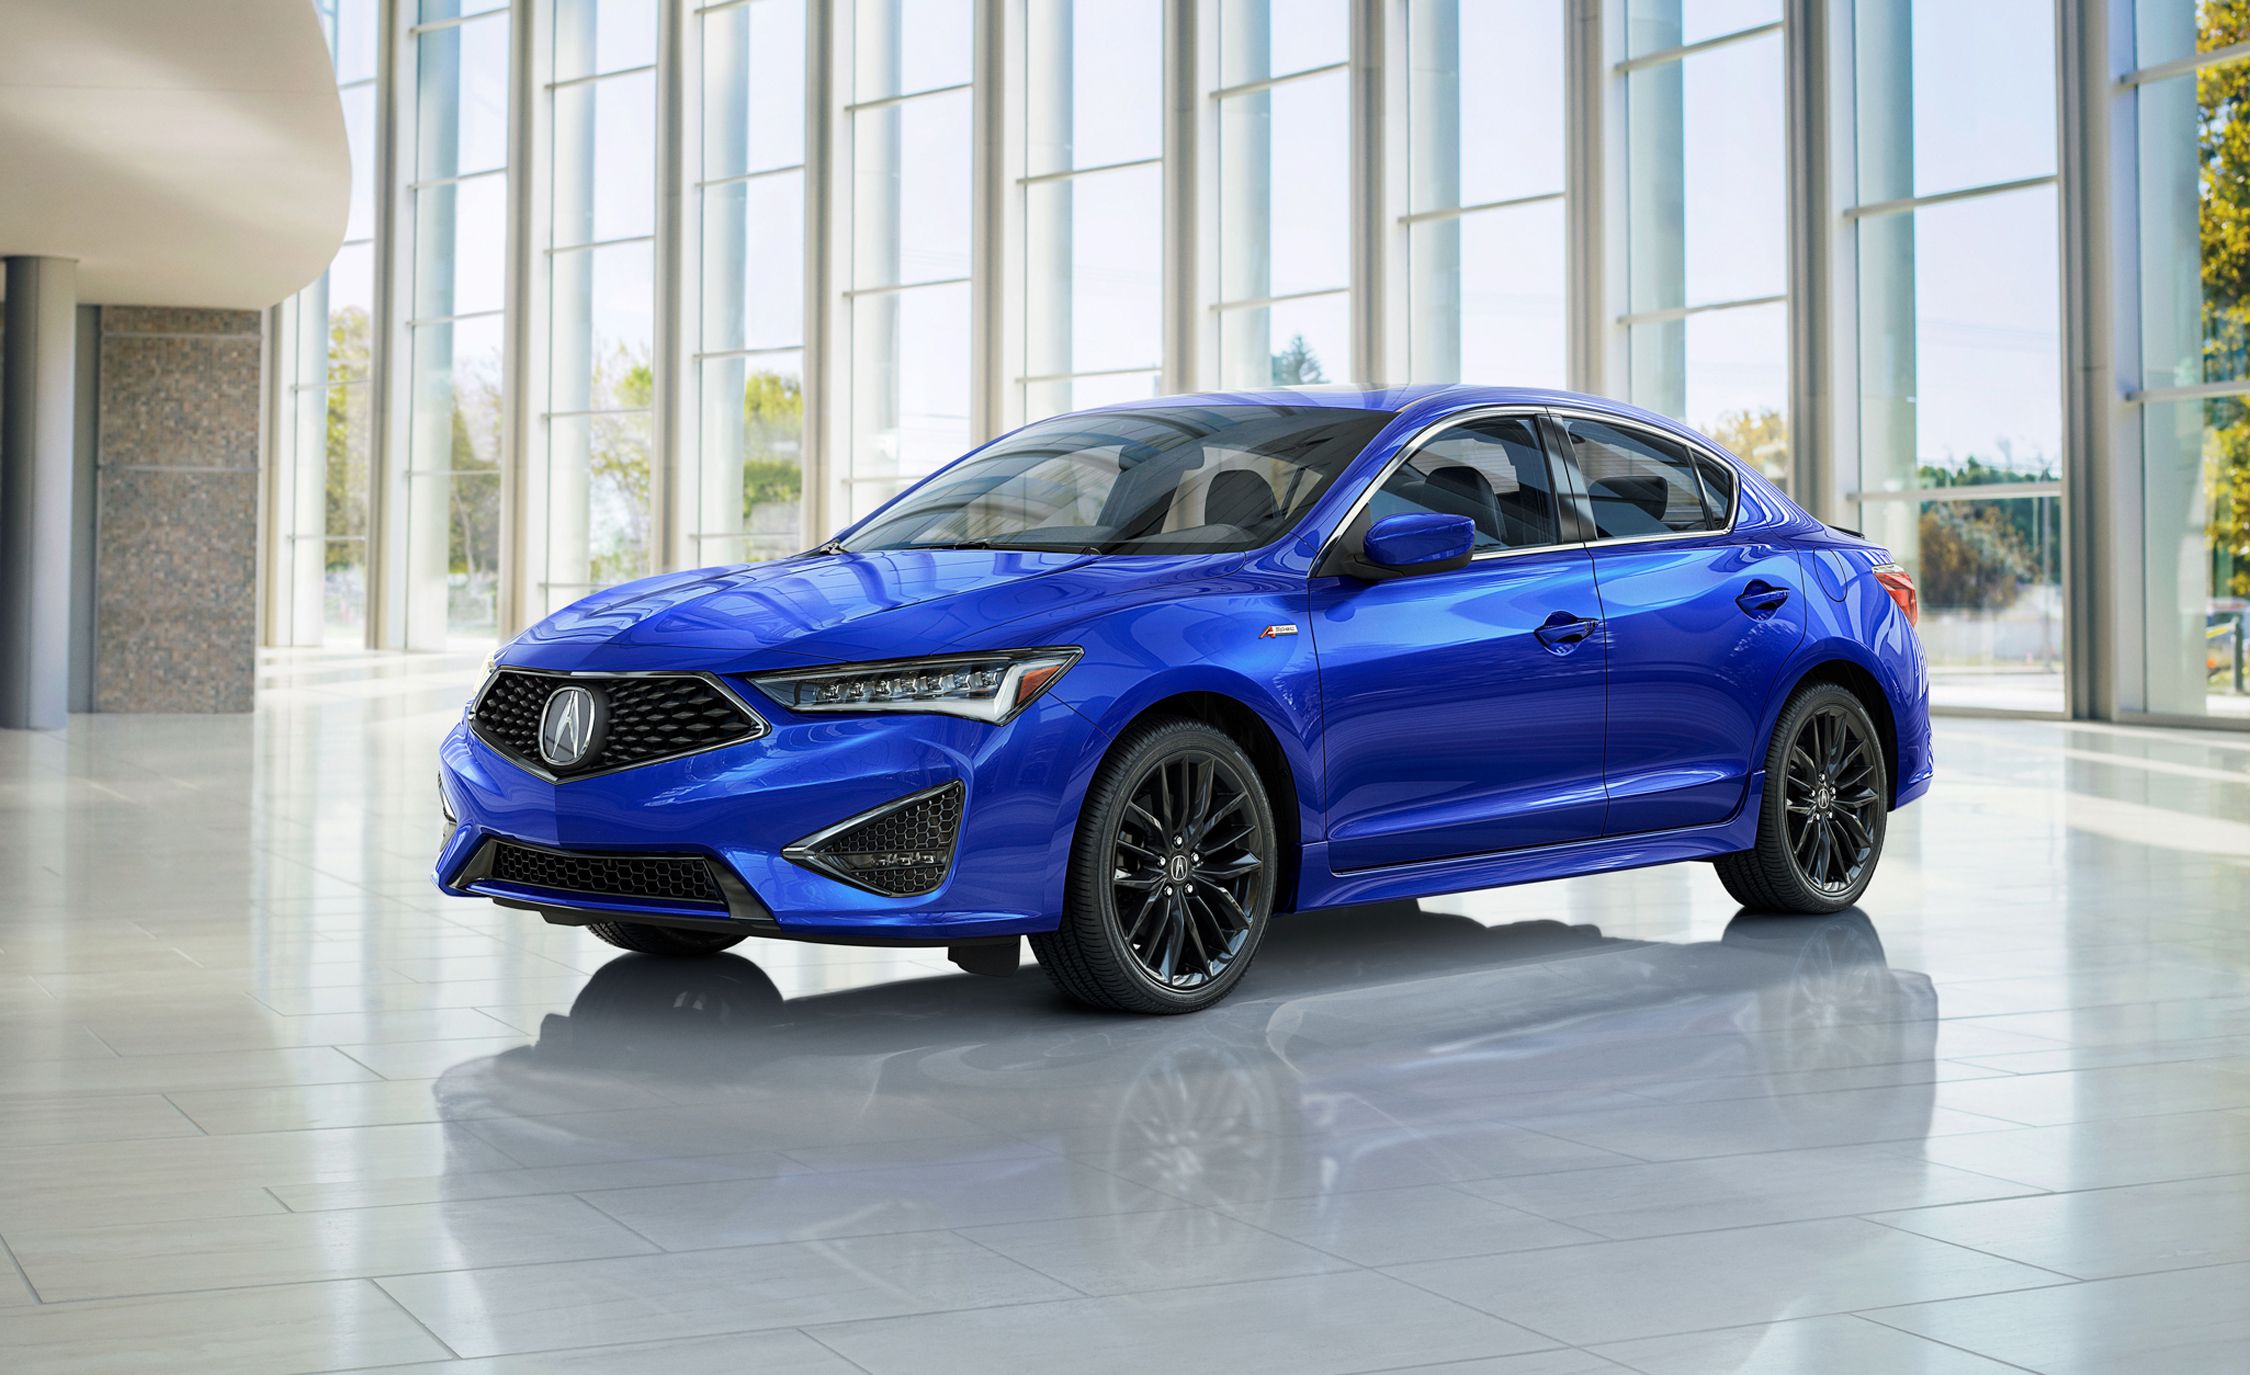 2019 Acura ILX Refreshed  Updated Compact Sedan with ASpec